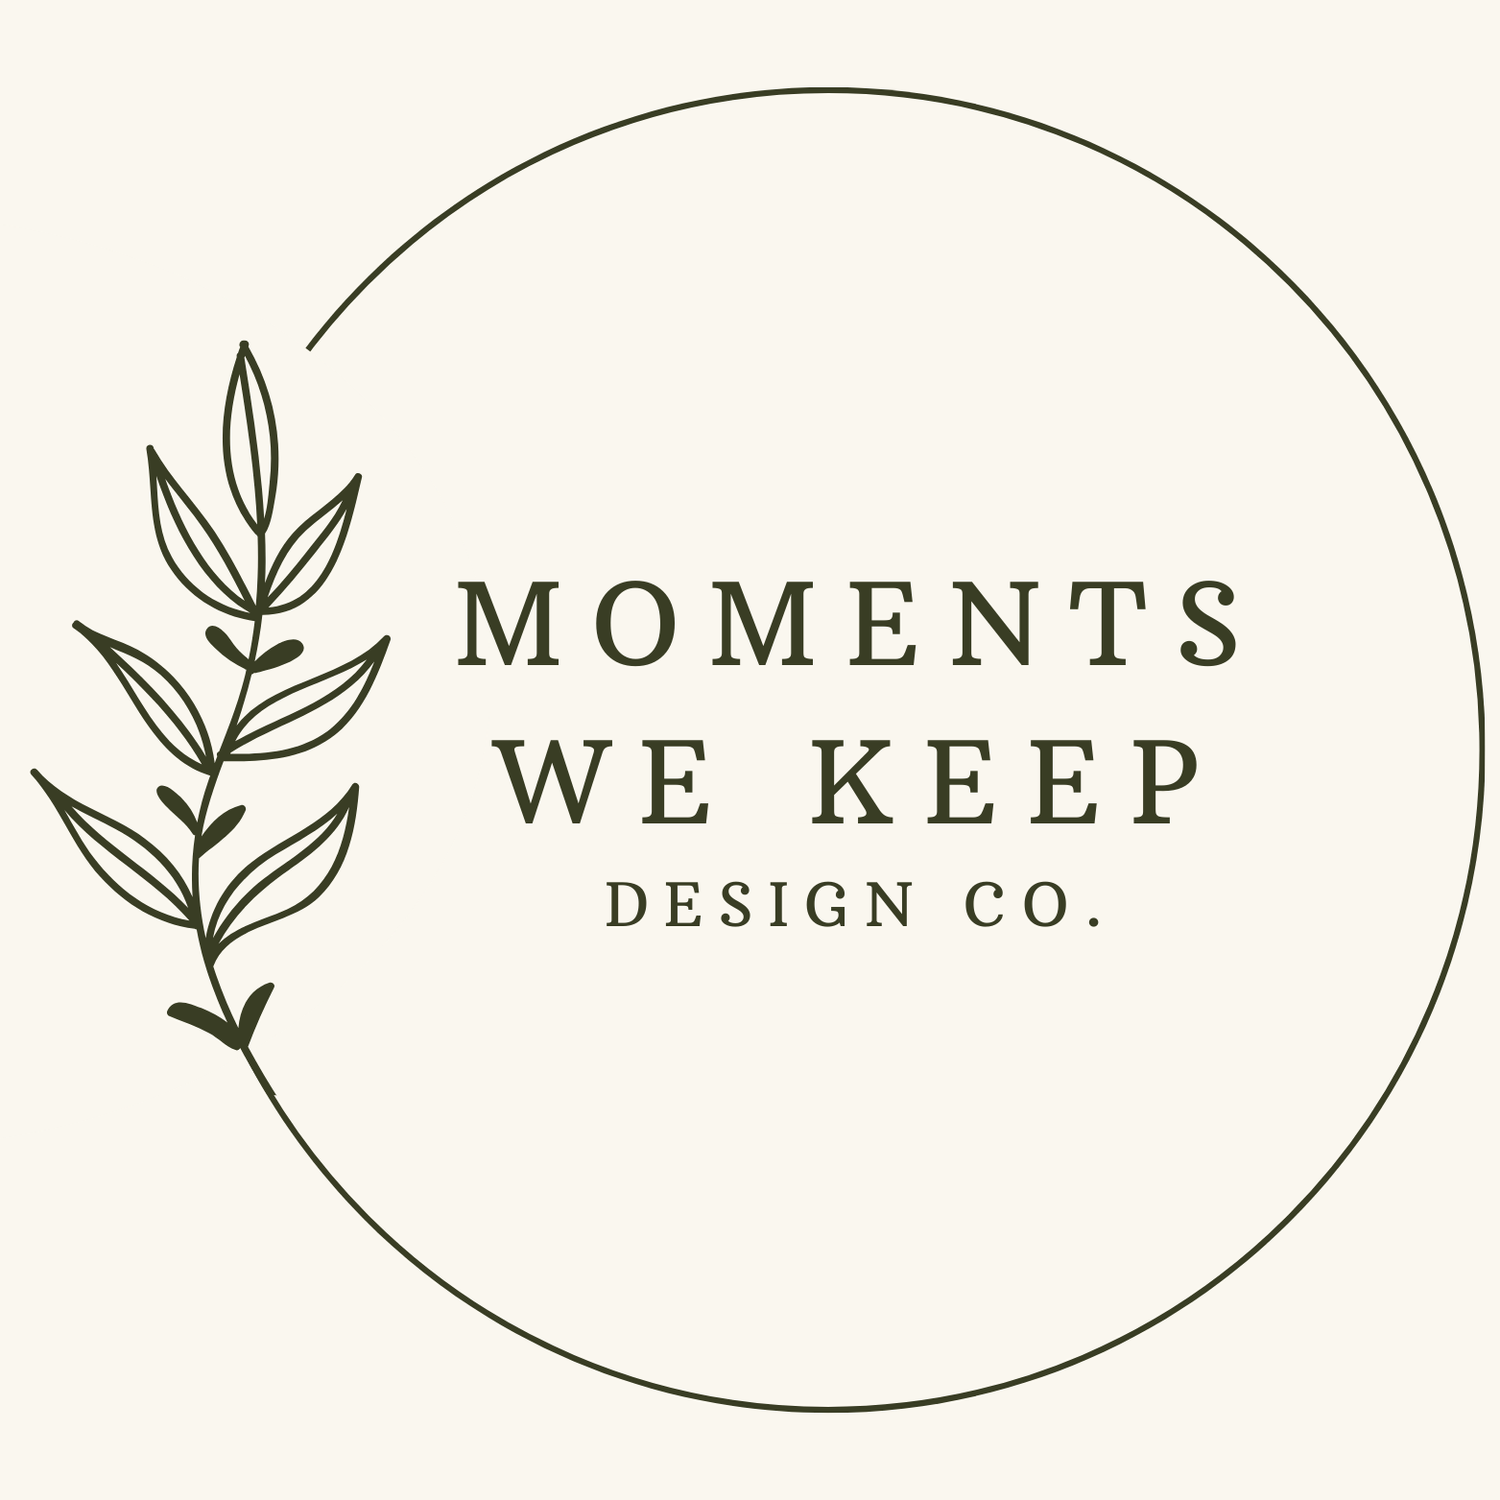 MOMENTS WE KEEP DESIGN CO.